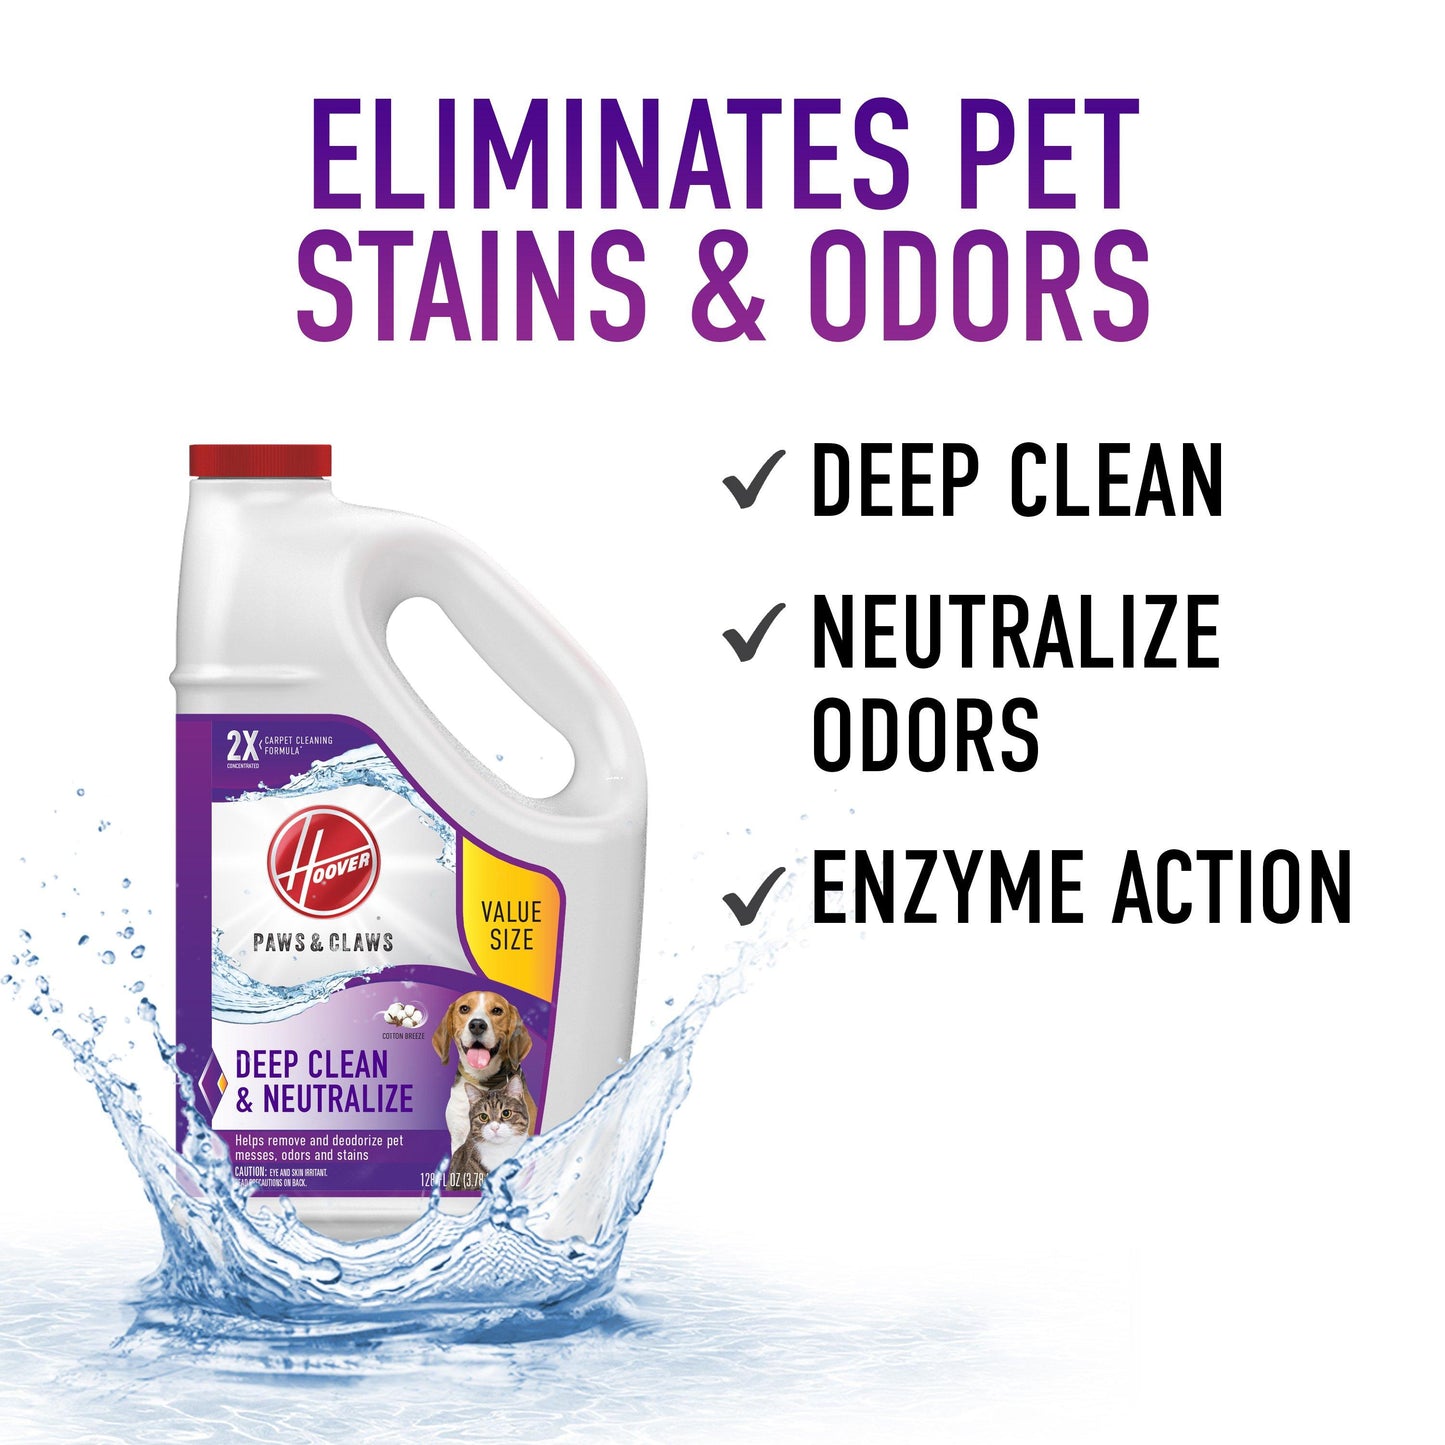 Paws & Claws Carpet Cleaning Formula 128 oz.